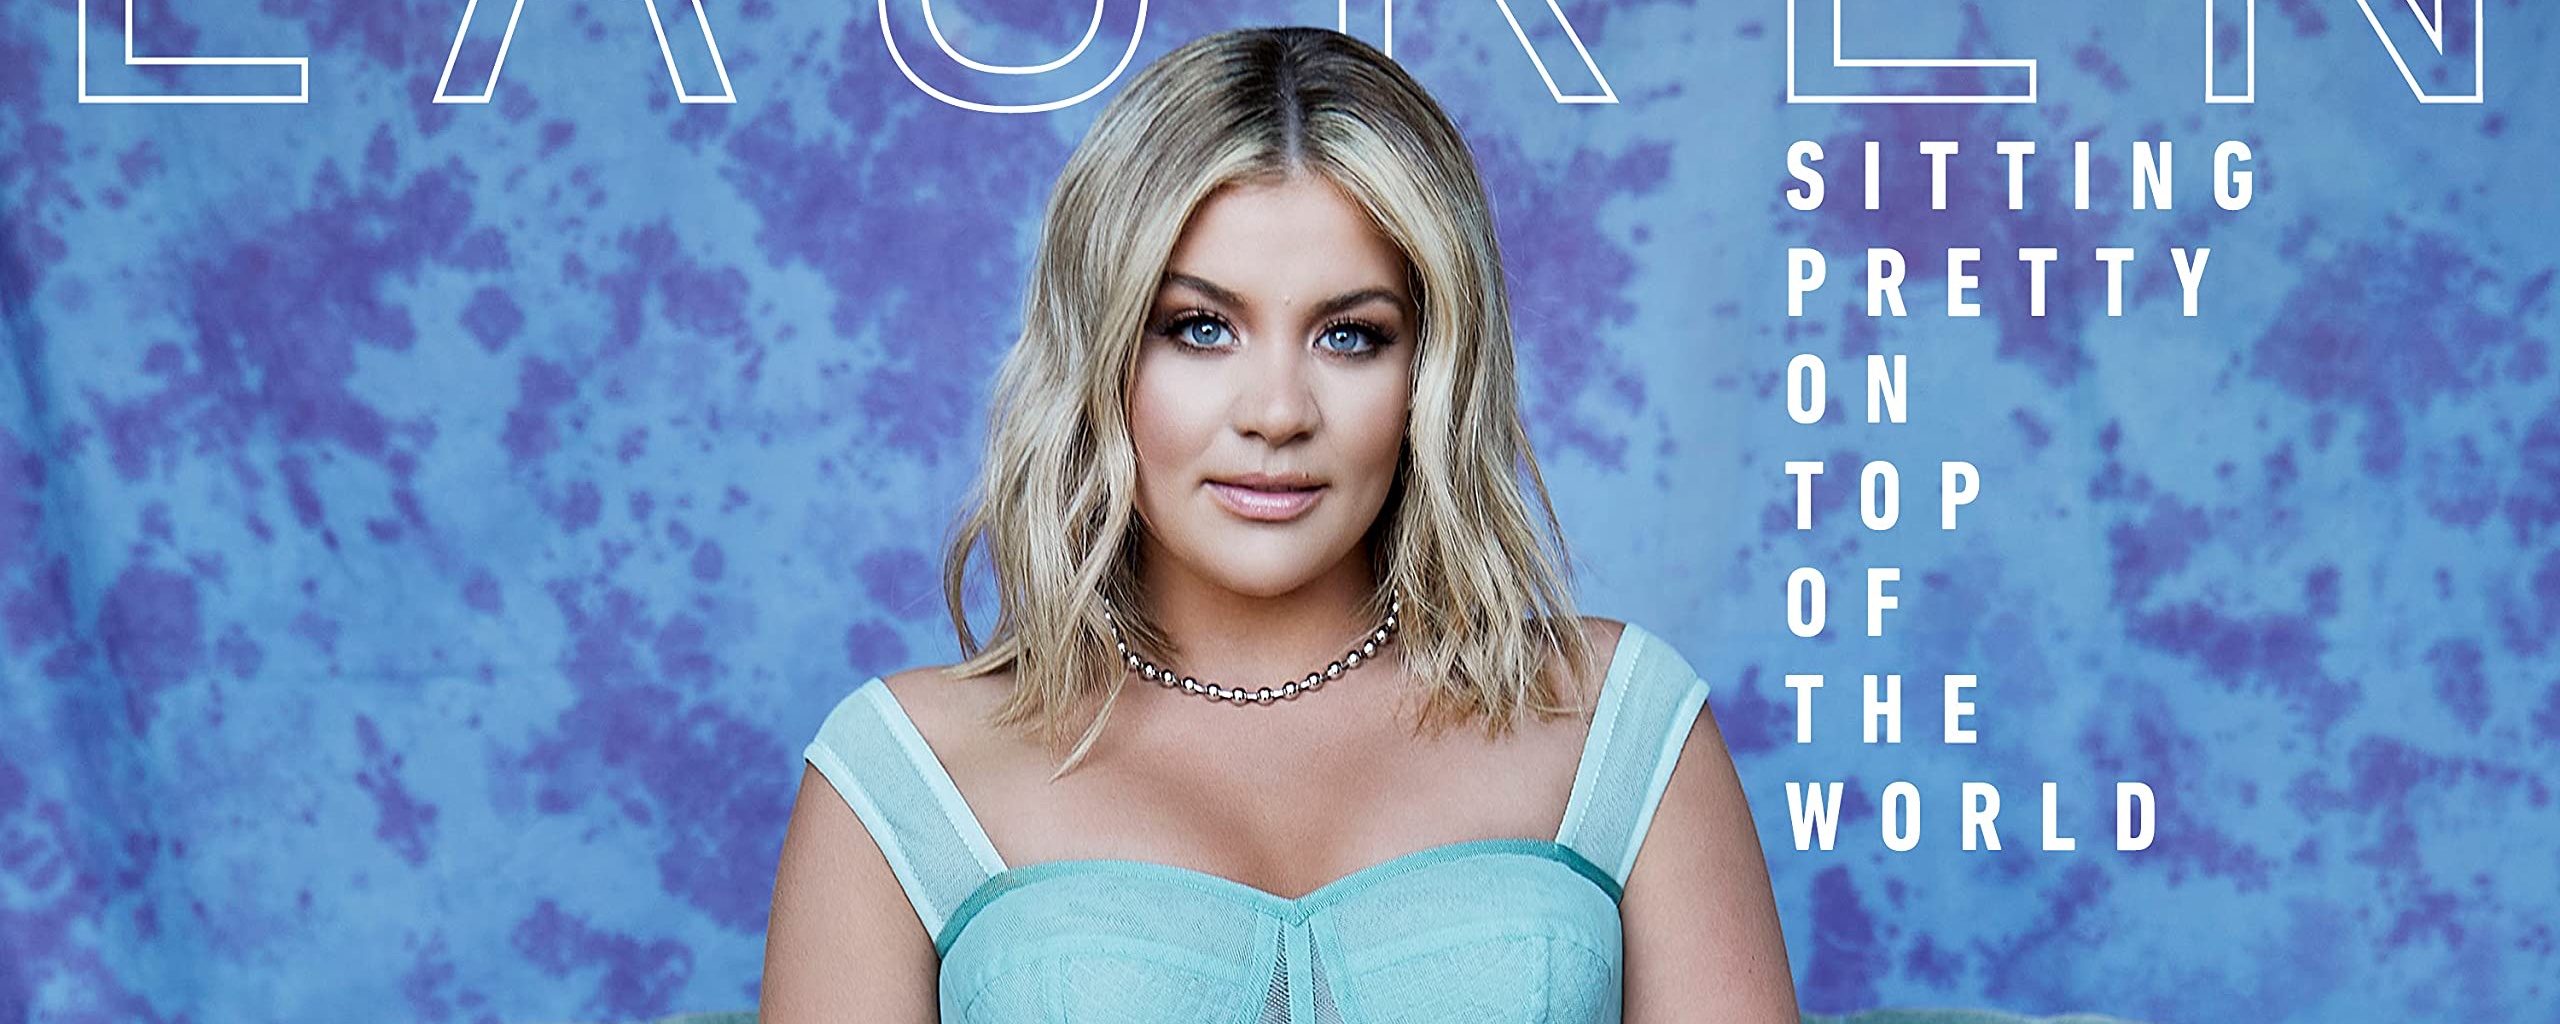 Lauren Alaina Opens Up About Pandemic Depression and New Album: “Writing Was Really Healing For Me”